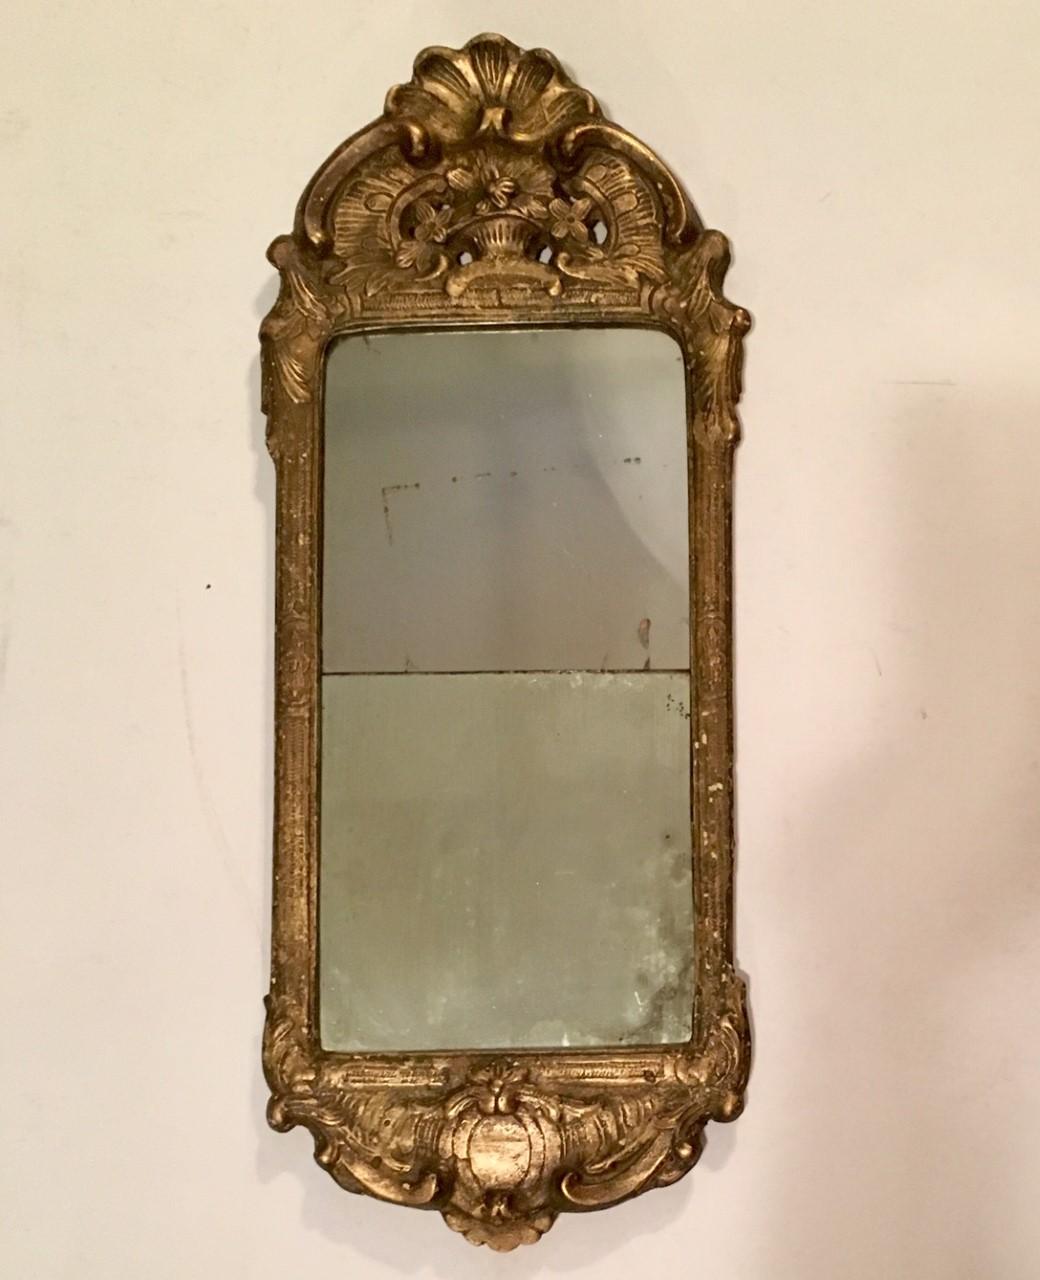 This is an excellent 18th century gilded and ornately carved wooden wall mirror with beautiful Gesso ornaments. It is in the original condition with great patina. The glass plate is in the original two parts. It is very difficult to find this rare